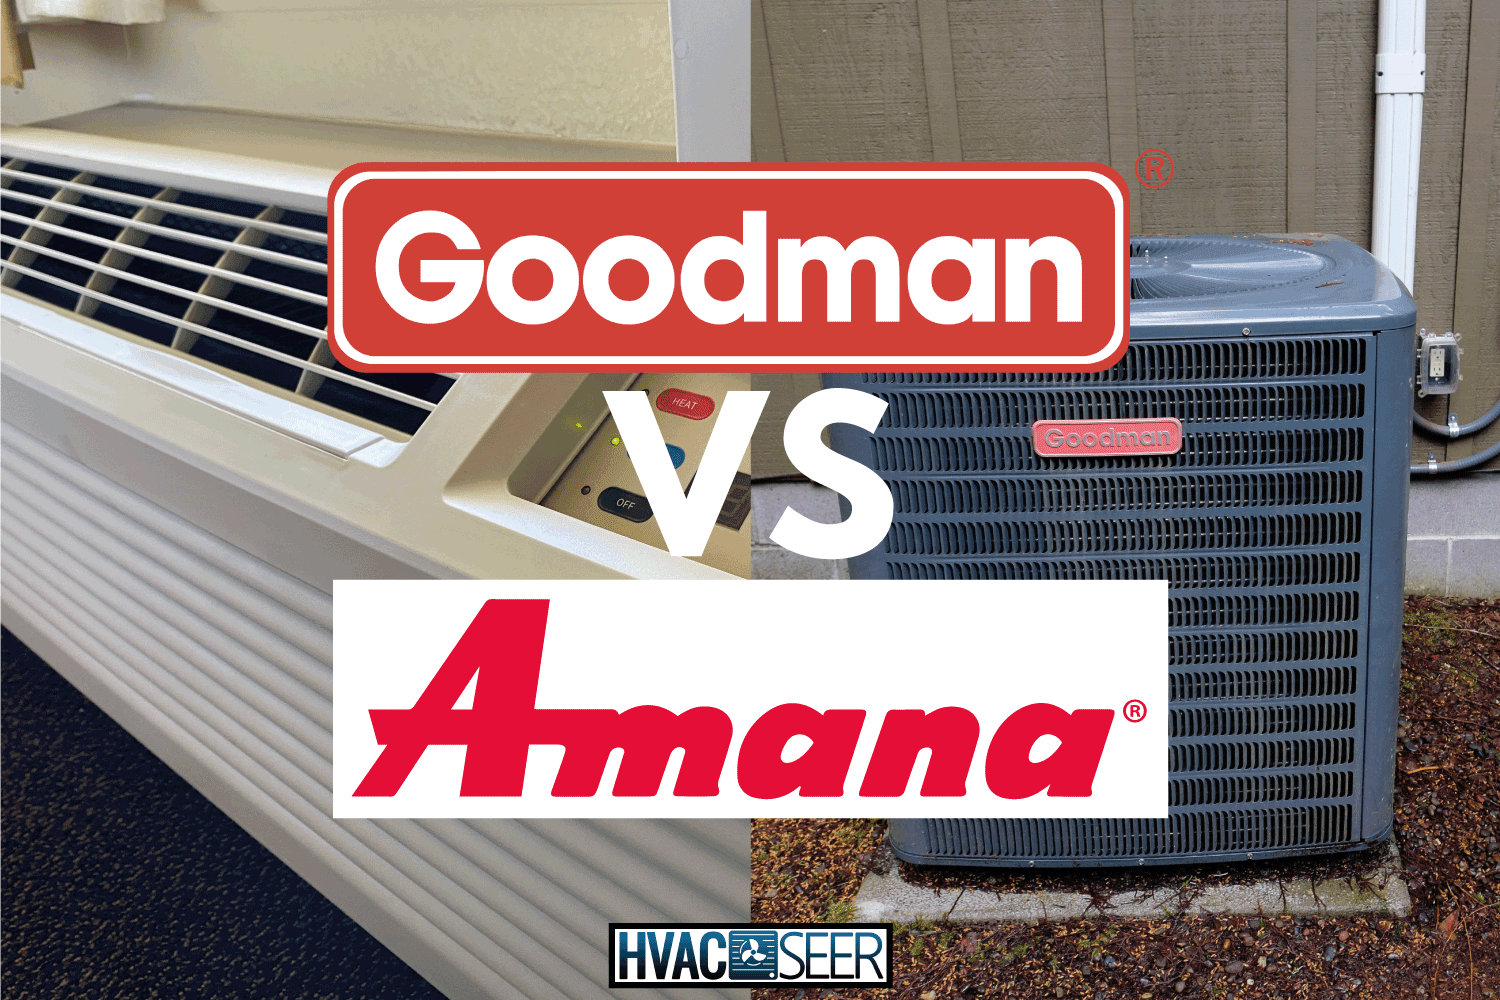 Amana PTAC unit installed under a window. outdoor compressor unit of Goodman. Goodman AC Vs Amana Which To Choose